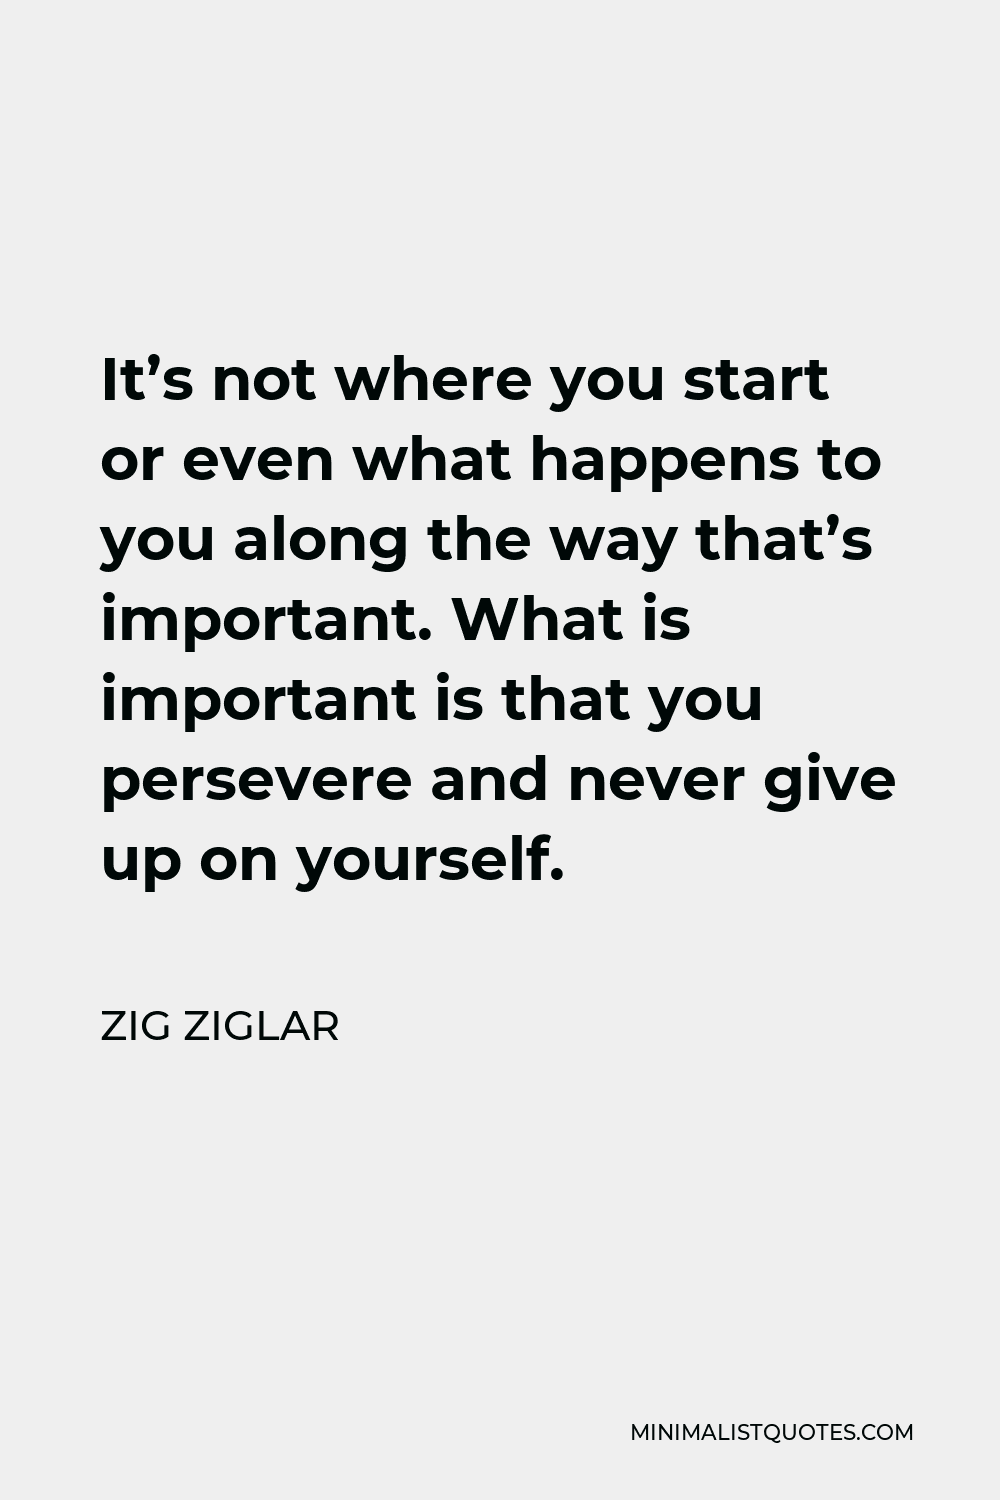 Zig Ziglar Quote - It’s not where you start or even what happens to you along the way that’s important. What is important is that you persevere and never give up on yourself.